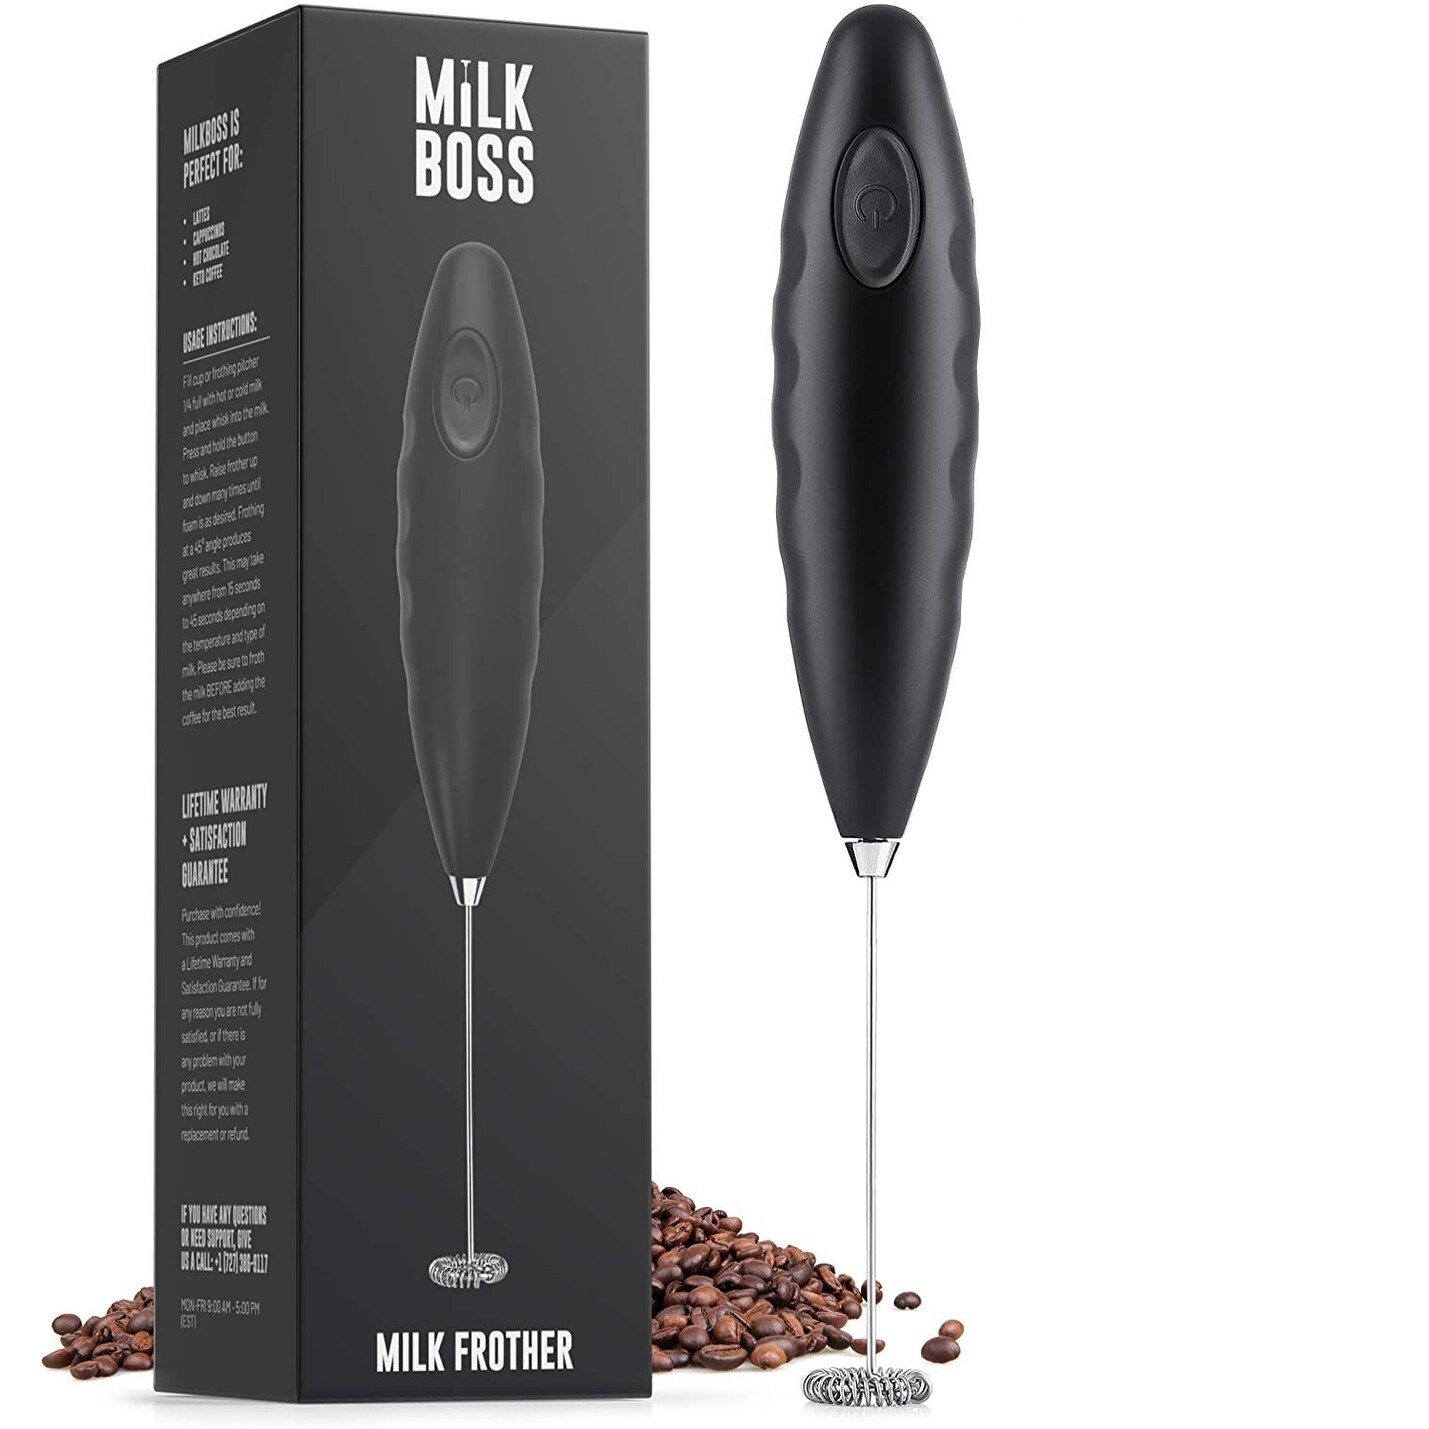 https://ak1.ostkcdn.com/images/products/is/images/direct/f66a1067c43cf07243a6abced69f28bc053f9ad8/Zulay-Kitchen-MB-Milk-Frother-Double-Grip-14%2C000-RPM.jpg